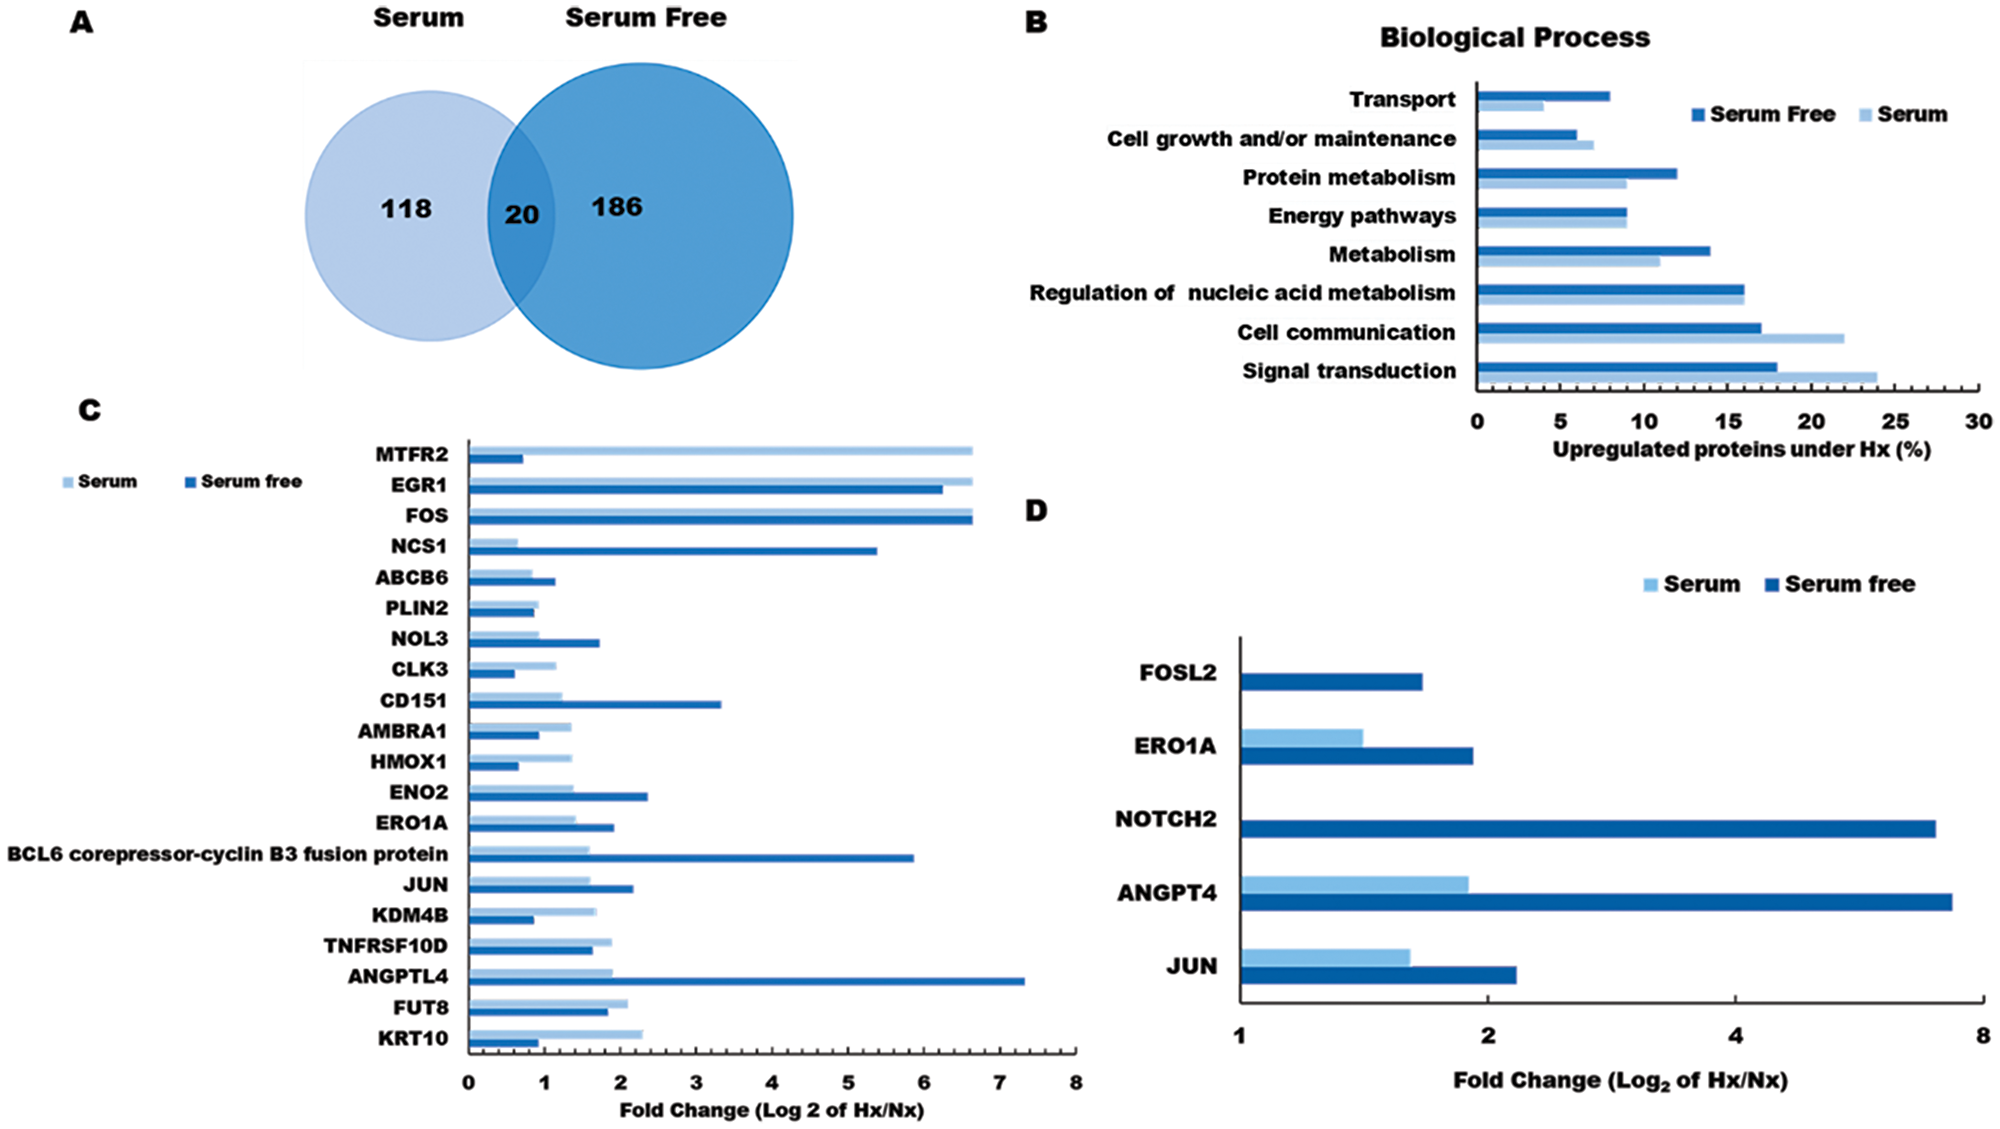 Gene ontology analysis of hypoxia effects on the pancreatic tumor cell proteome.